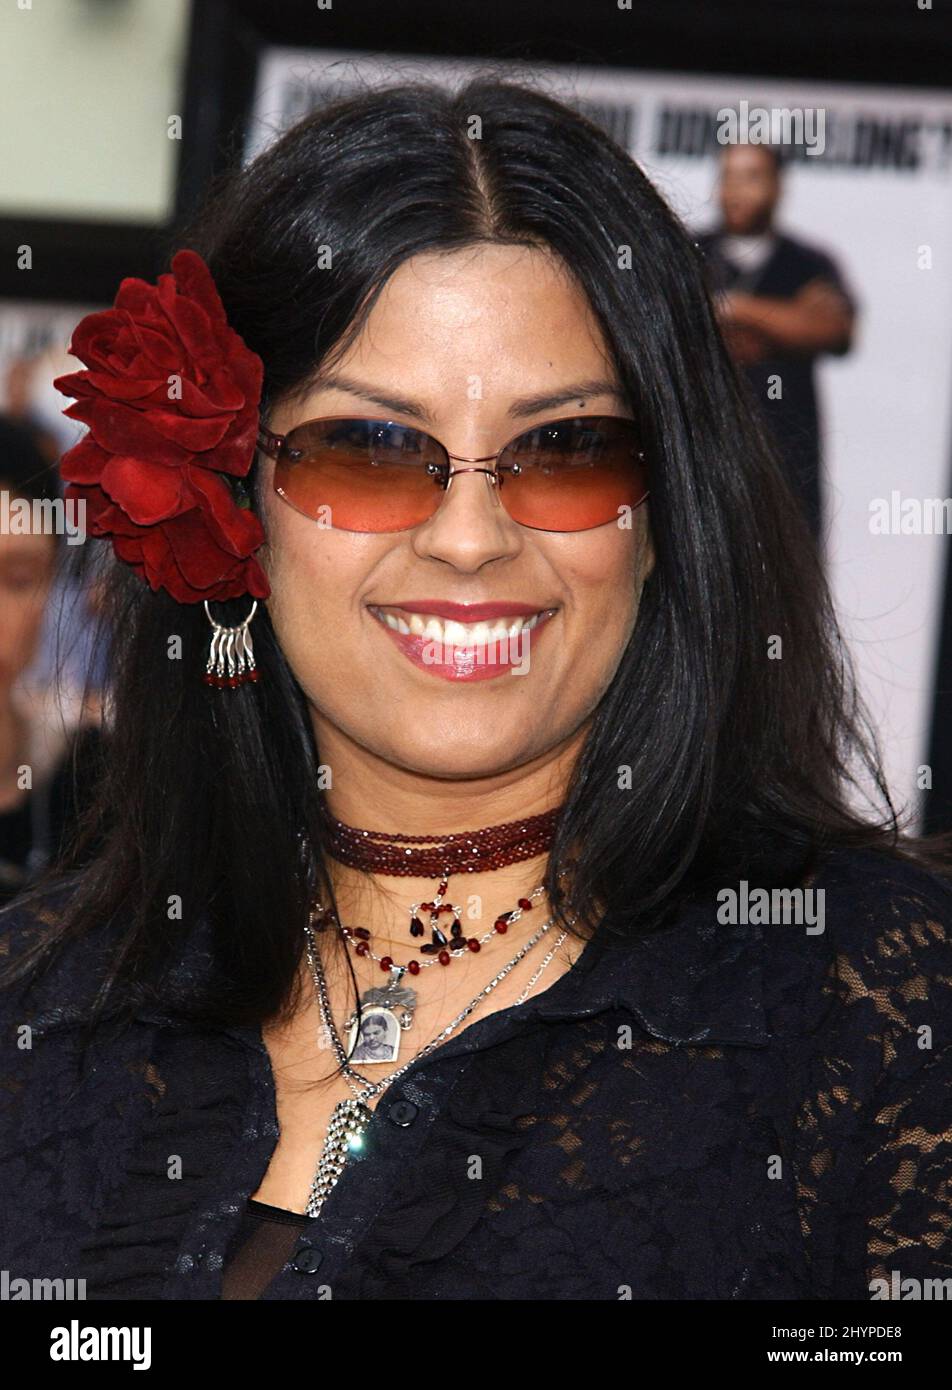 REBEKAH DEL RIO ATTENDS THE MALIBU'S MOST WANTED FILM PREMIERE IN HOLLYWOOD PICTURE: UK PRESS Stock Photo